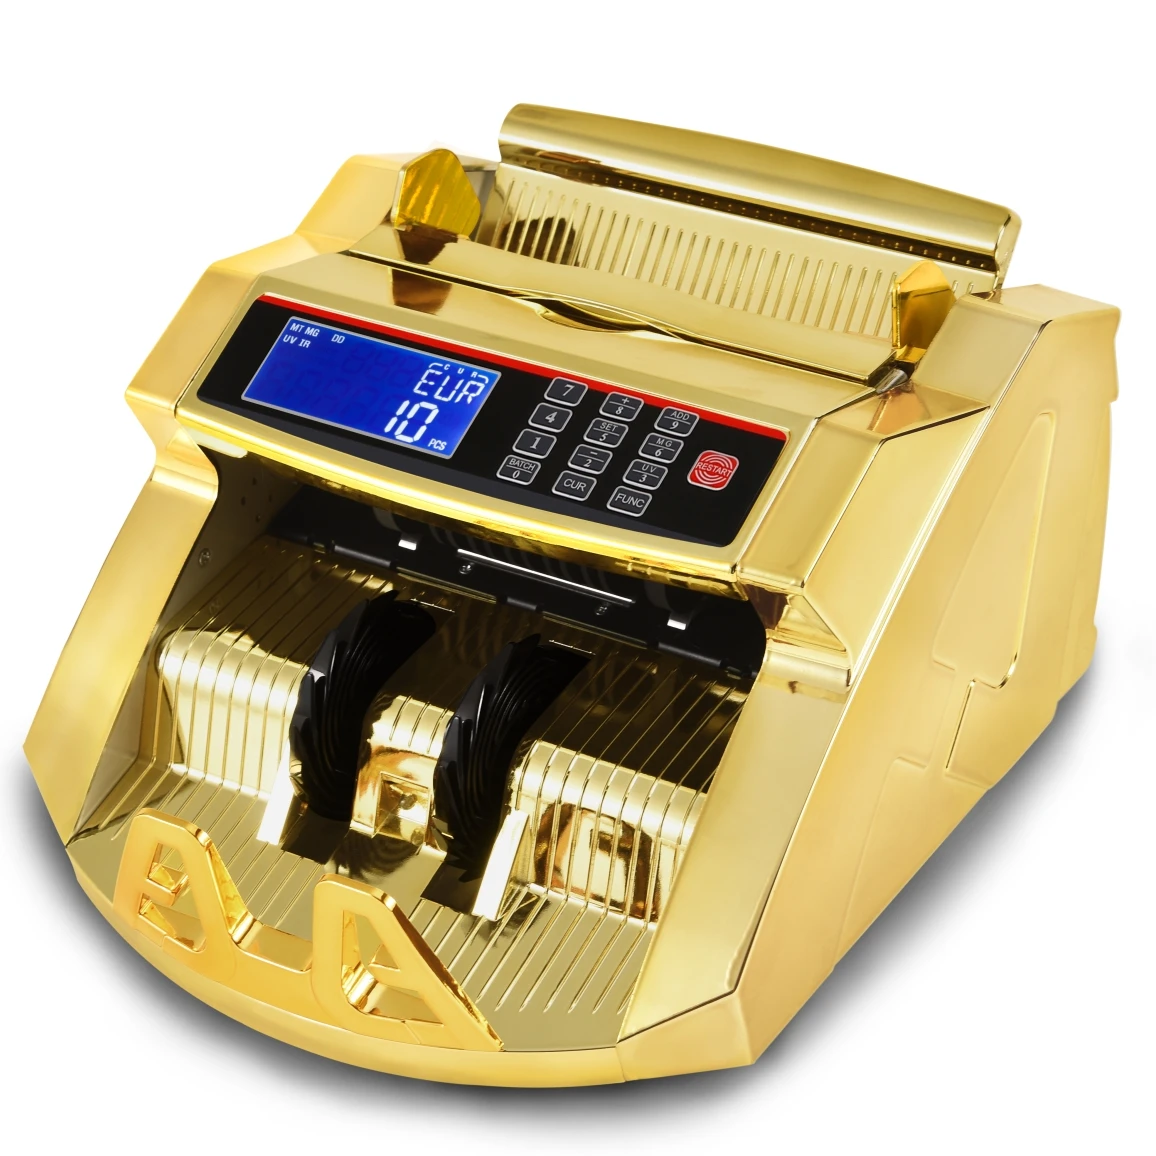 FJ2819 LCD Screen Gold-plated money detector UV&MG Gold cash counting machine